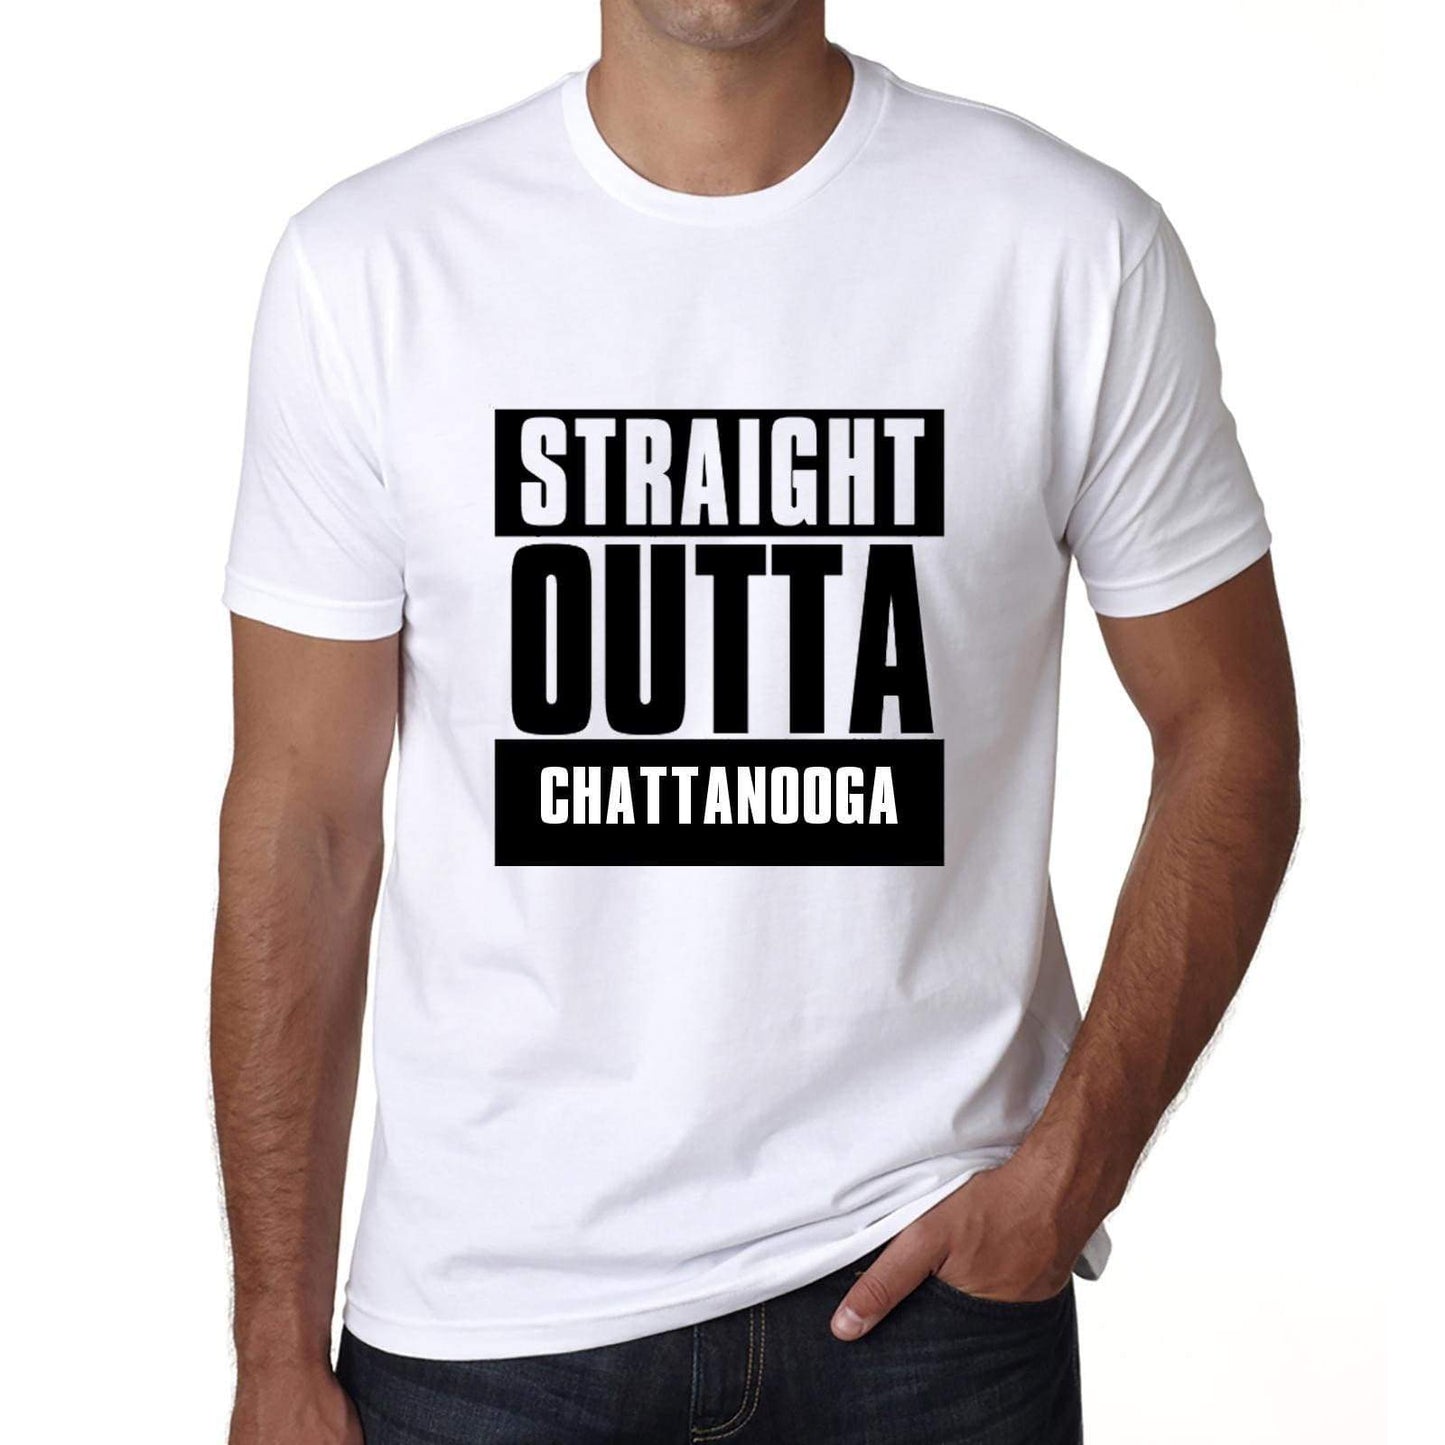 Straight Outta Chattanooga Mens Short Sleeve Round Neck T-Shirt 00027 - White / S - Casual